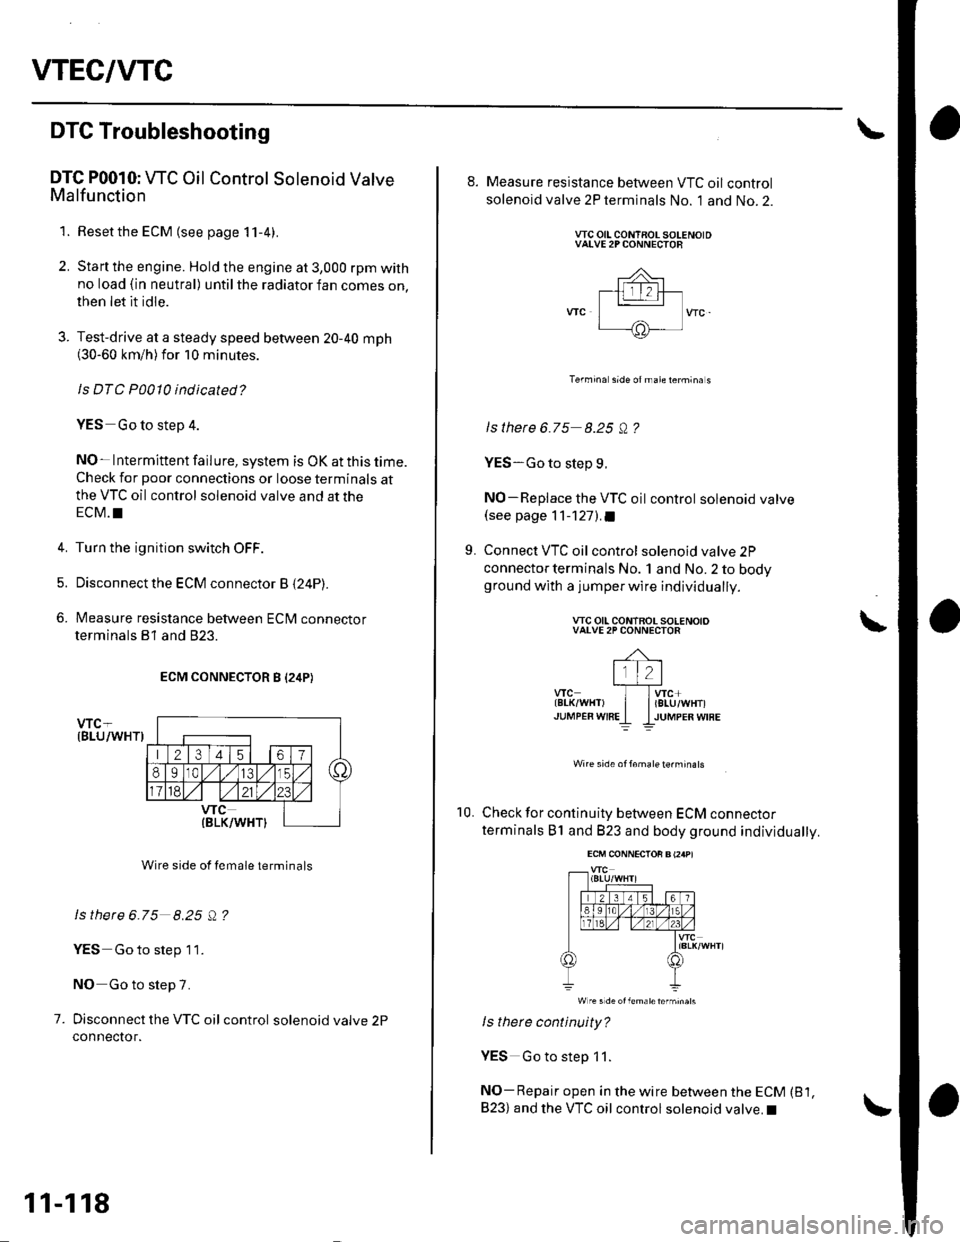 HONDA CIVIC 2002 7.G Workshop Manual VTEC/VTC
DTG Troubleshooting
DTC P0010: WC Oil Control Solenoid ValveMalfunction
1. Resetthe ECM (see page 11-4).
2. Start the engine. Hold the engine at 3,000 rpm withno load (in neutral) until the r